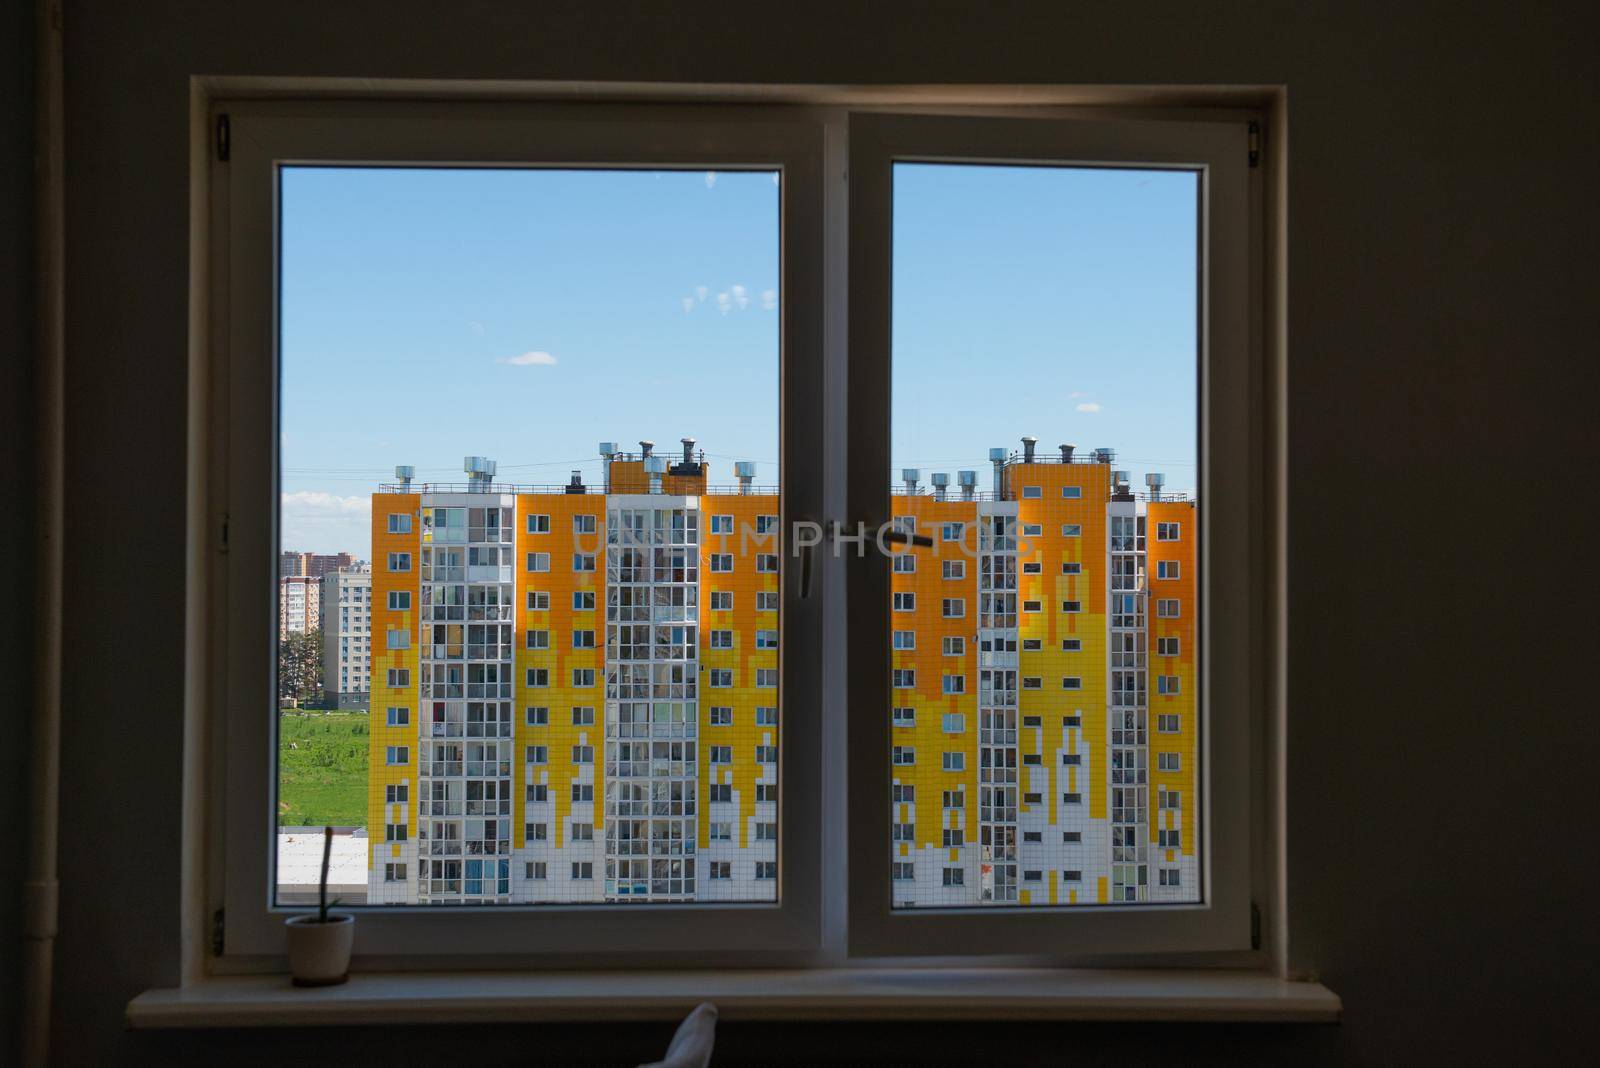 view of the apartment building from the window by marynkin